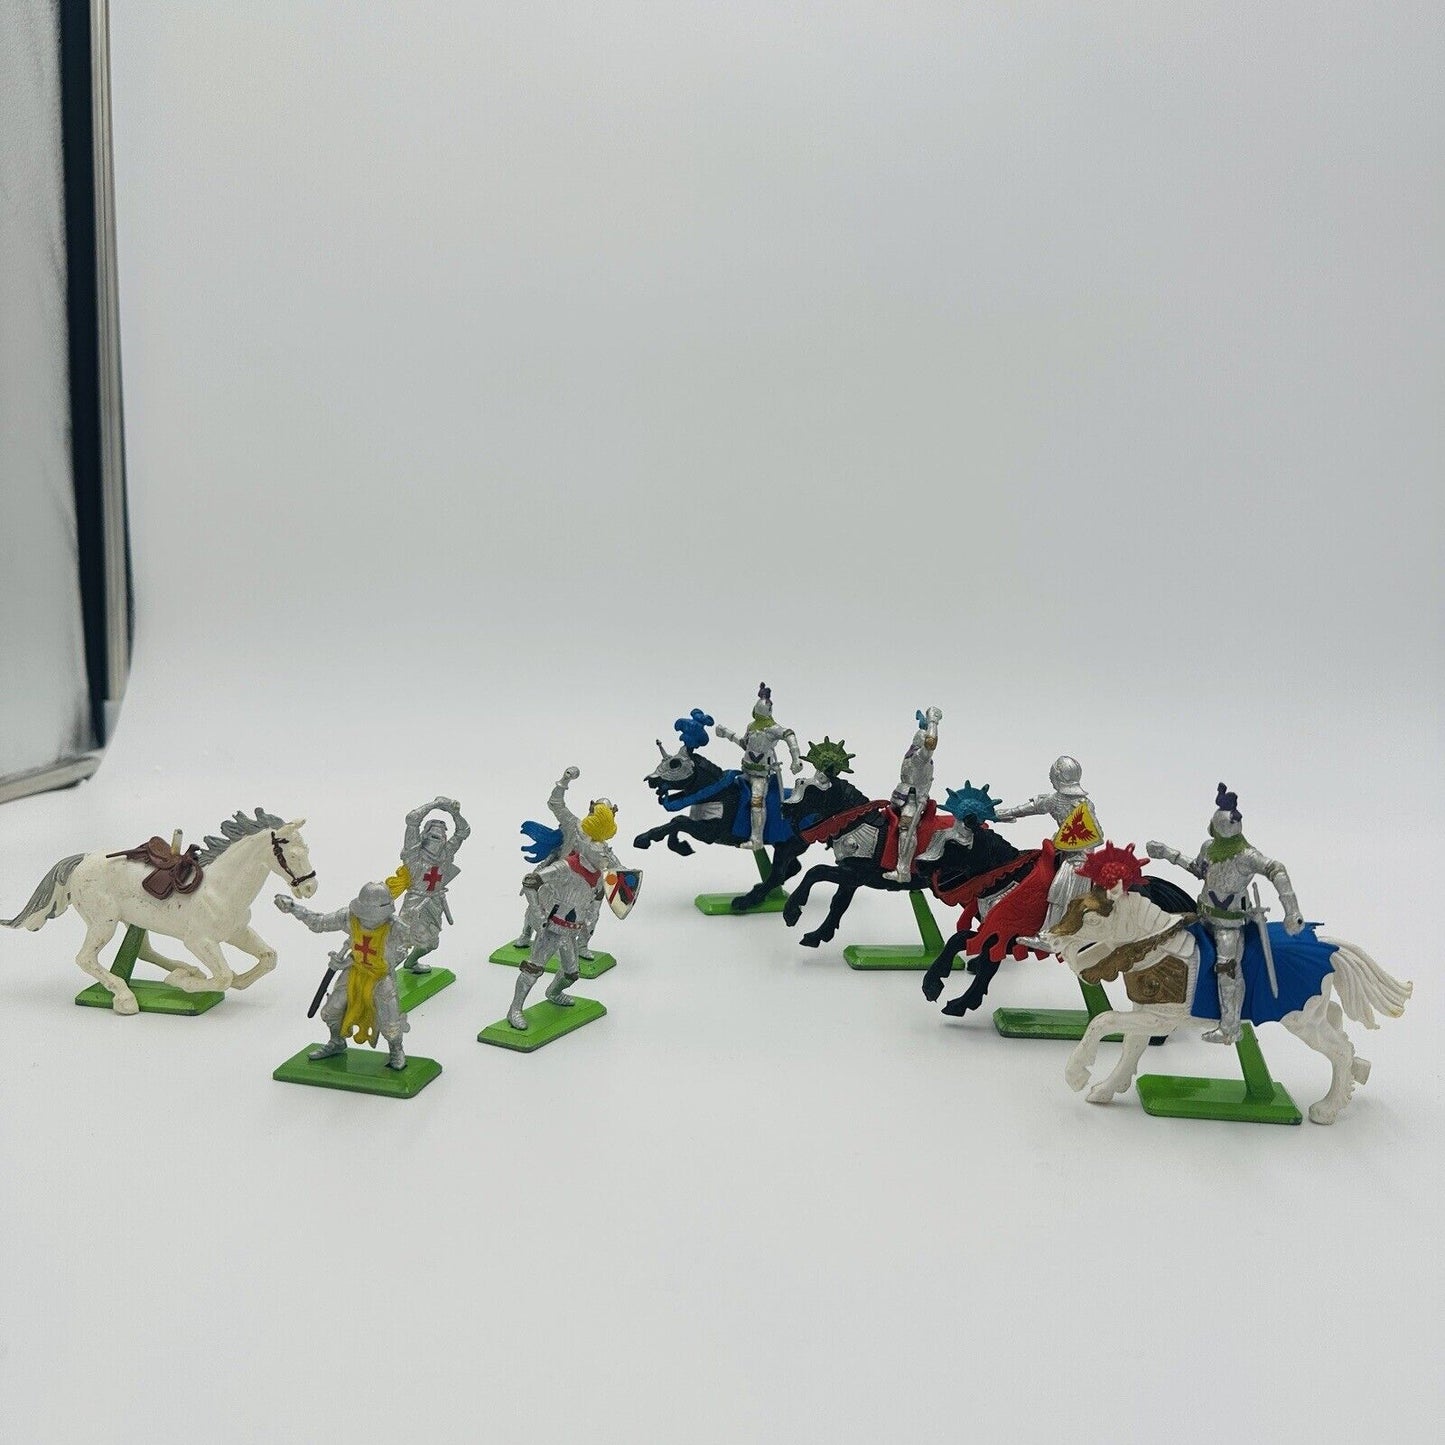 britains ltd 1971 soldiers knights Medieval Figurines Lot 9 Pieces England Made